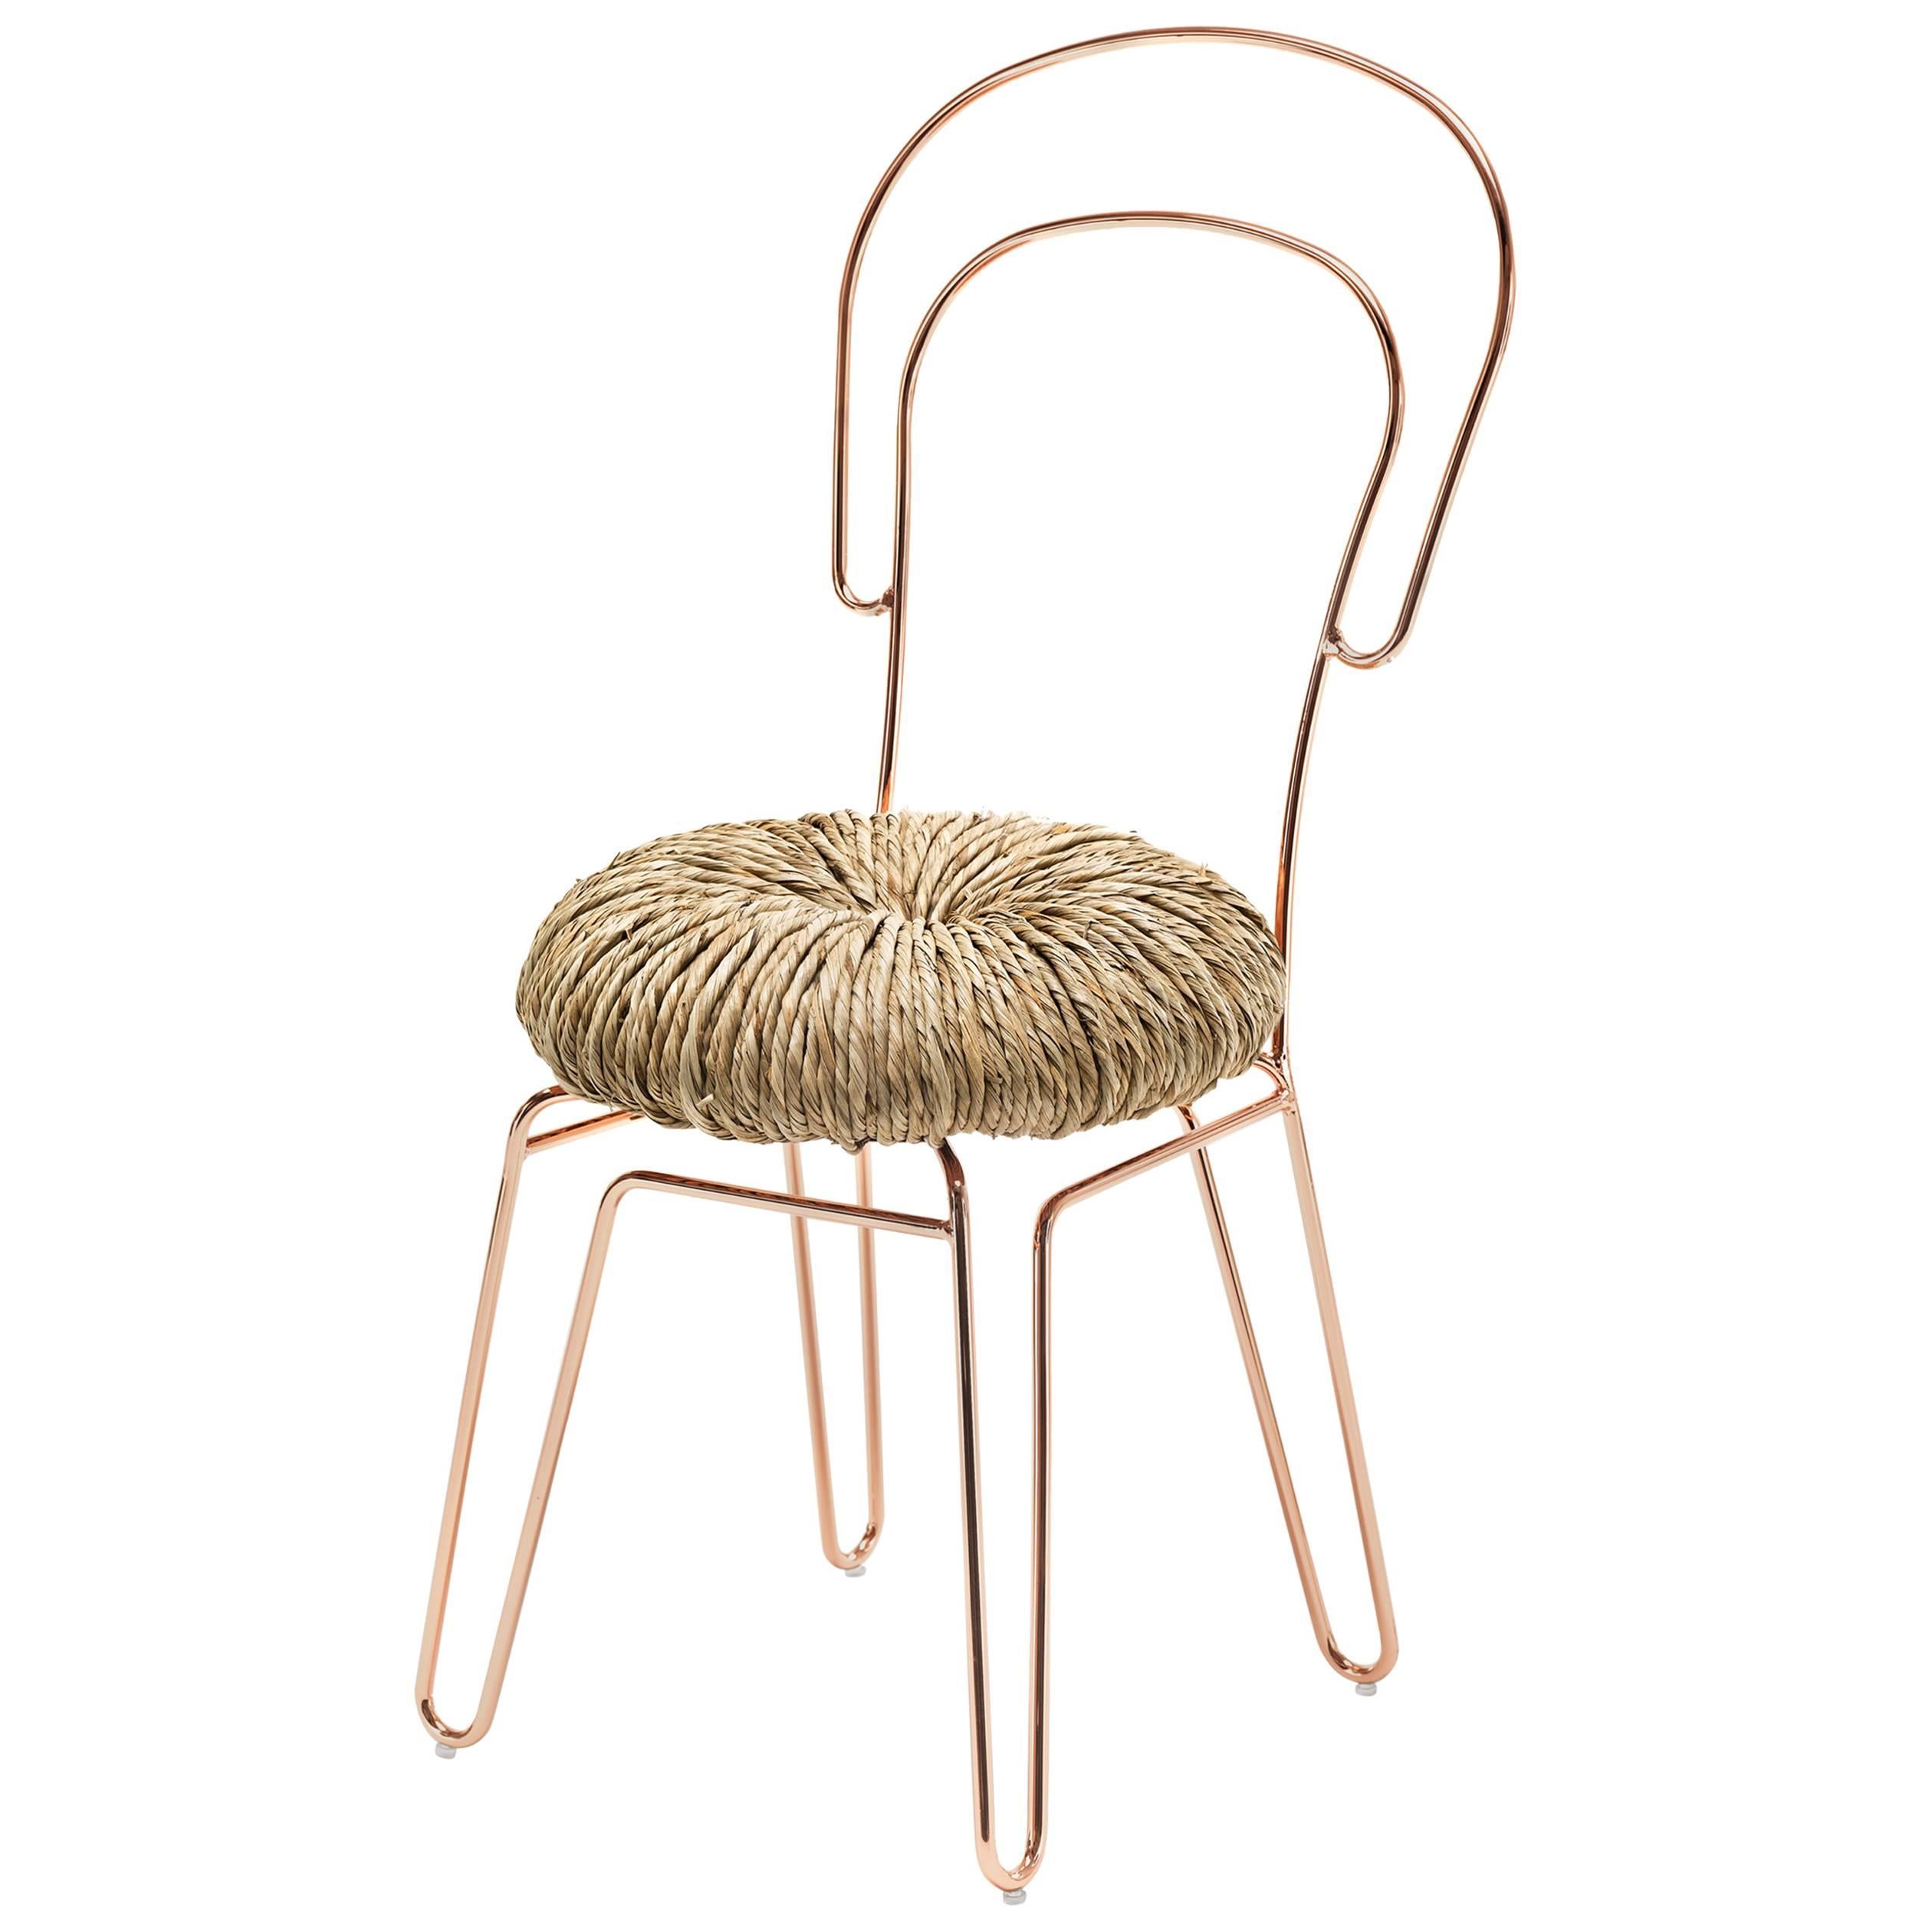 Donut Chair ‘Set of 2’ in Copper Finish by Alessandra Baldereschi & Mogg For Sale